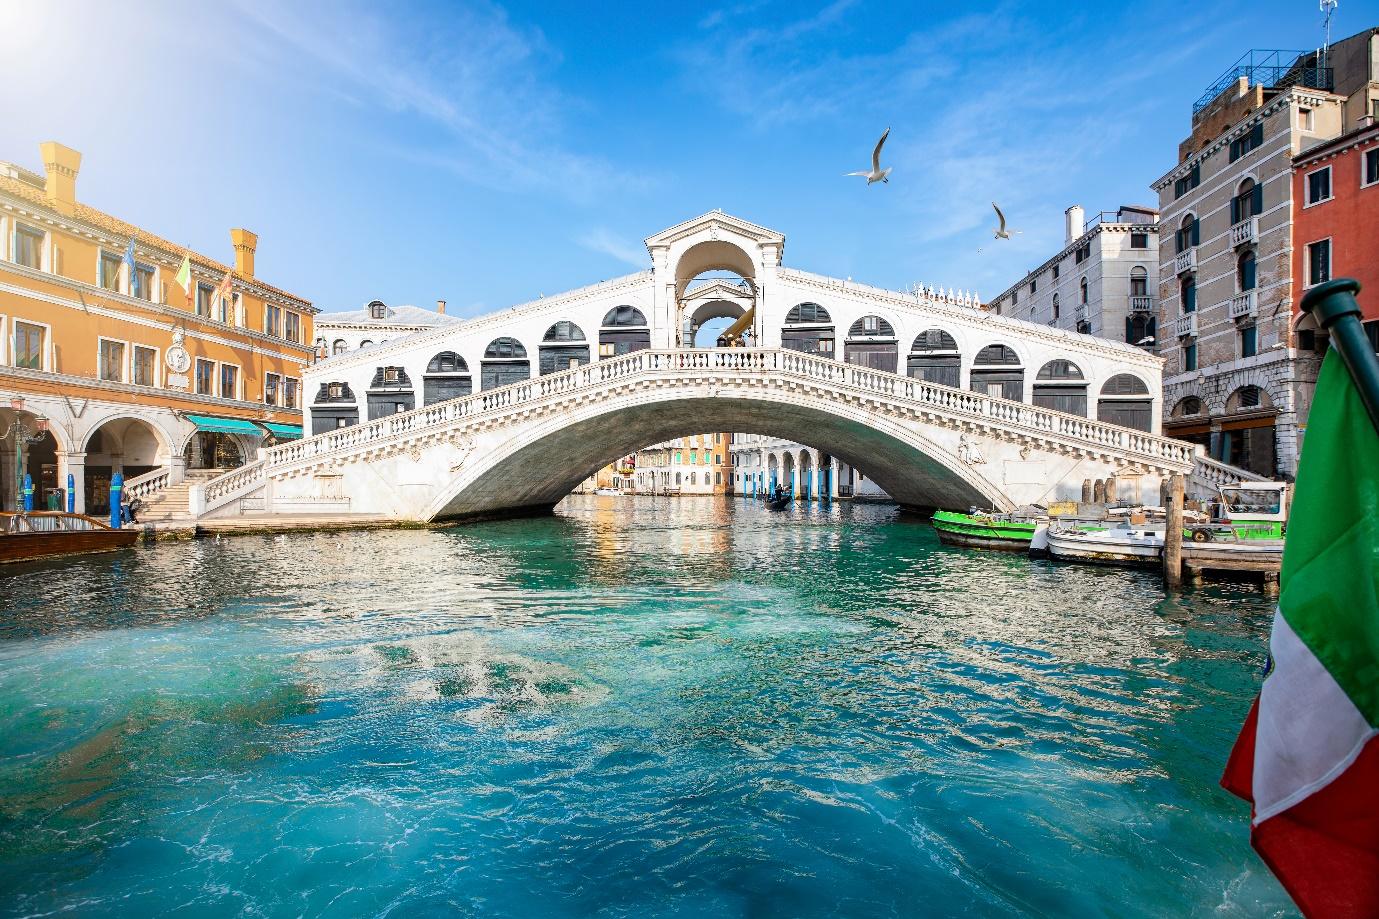 Rialto Bridge over water with boats and buildings

Description automatically generated